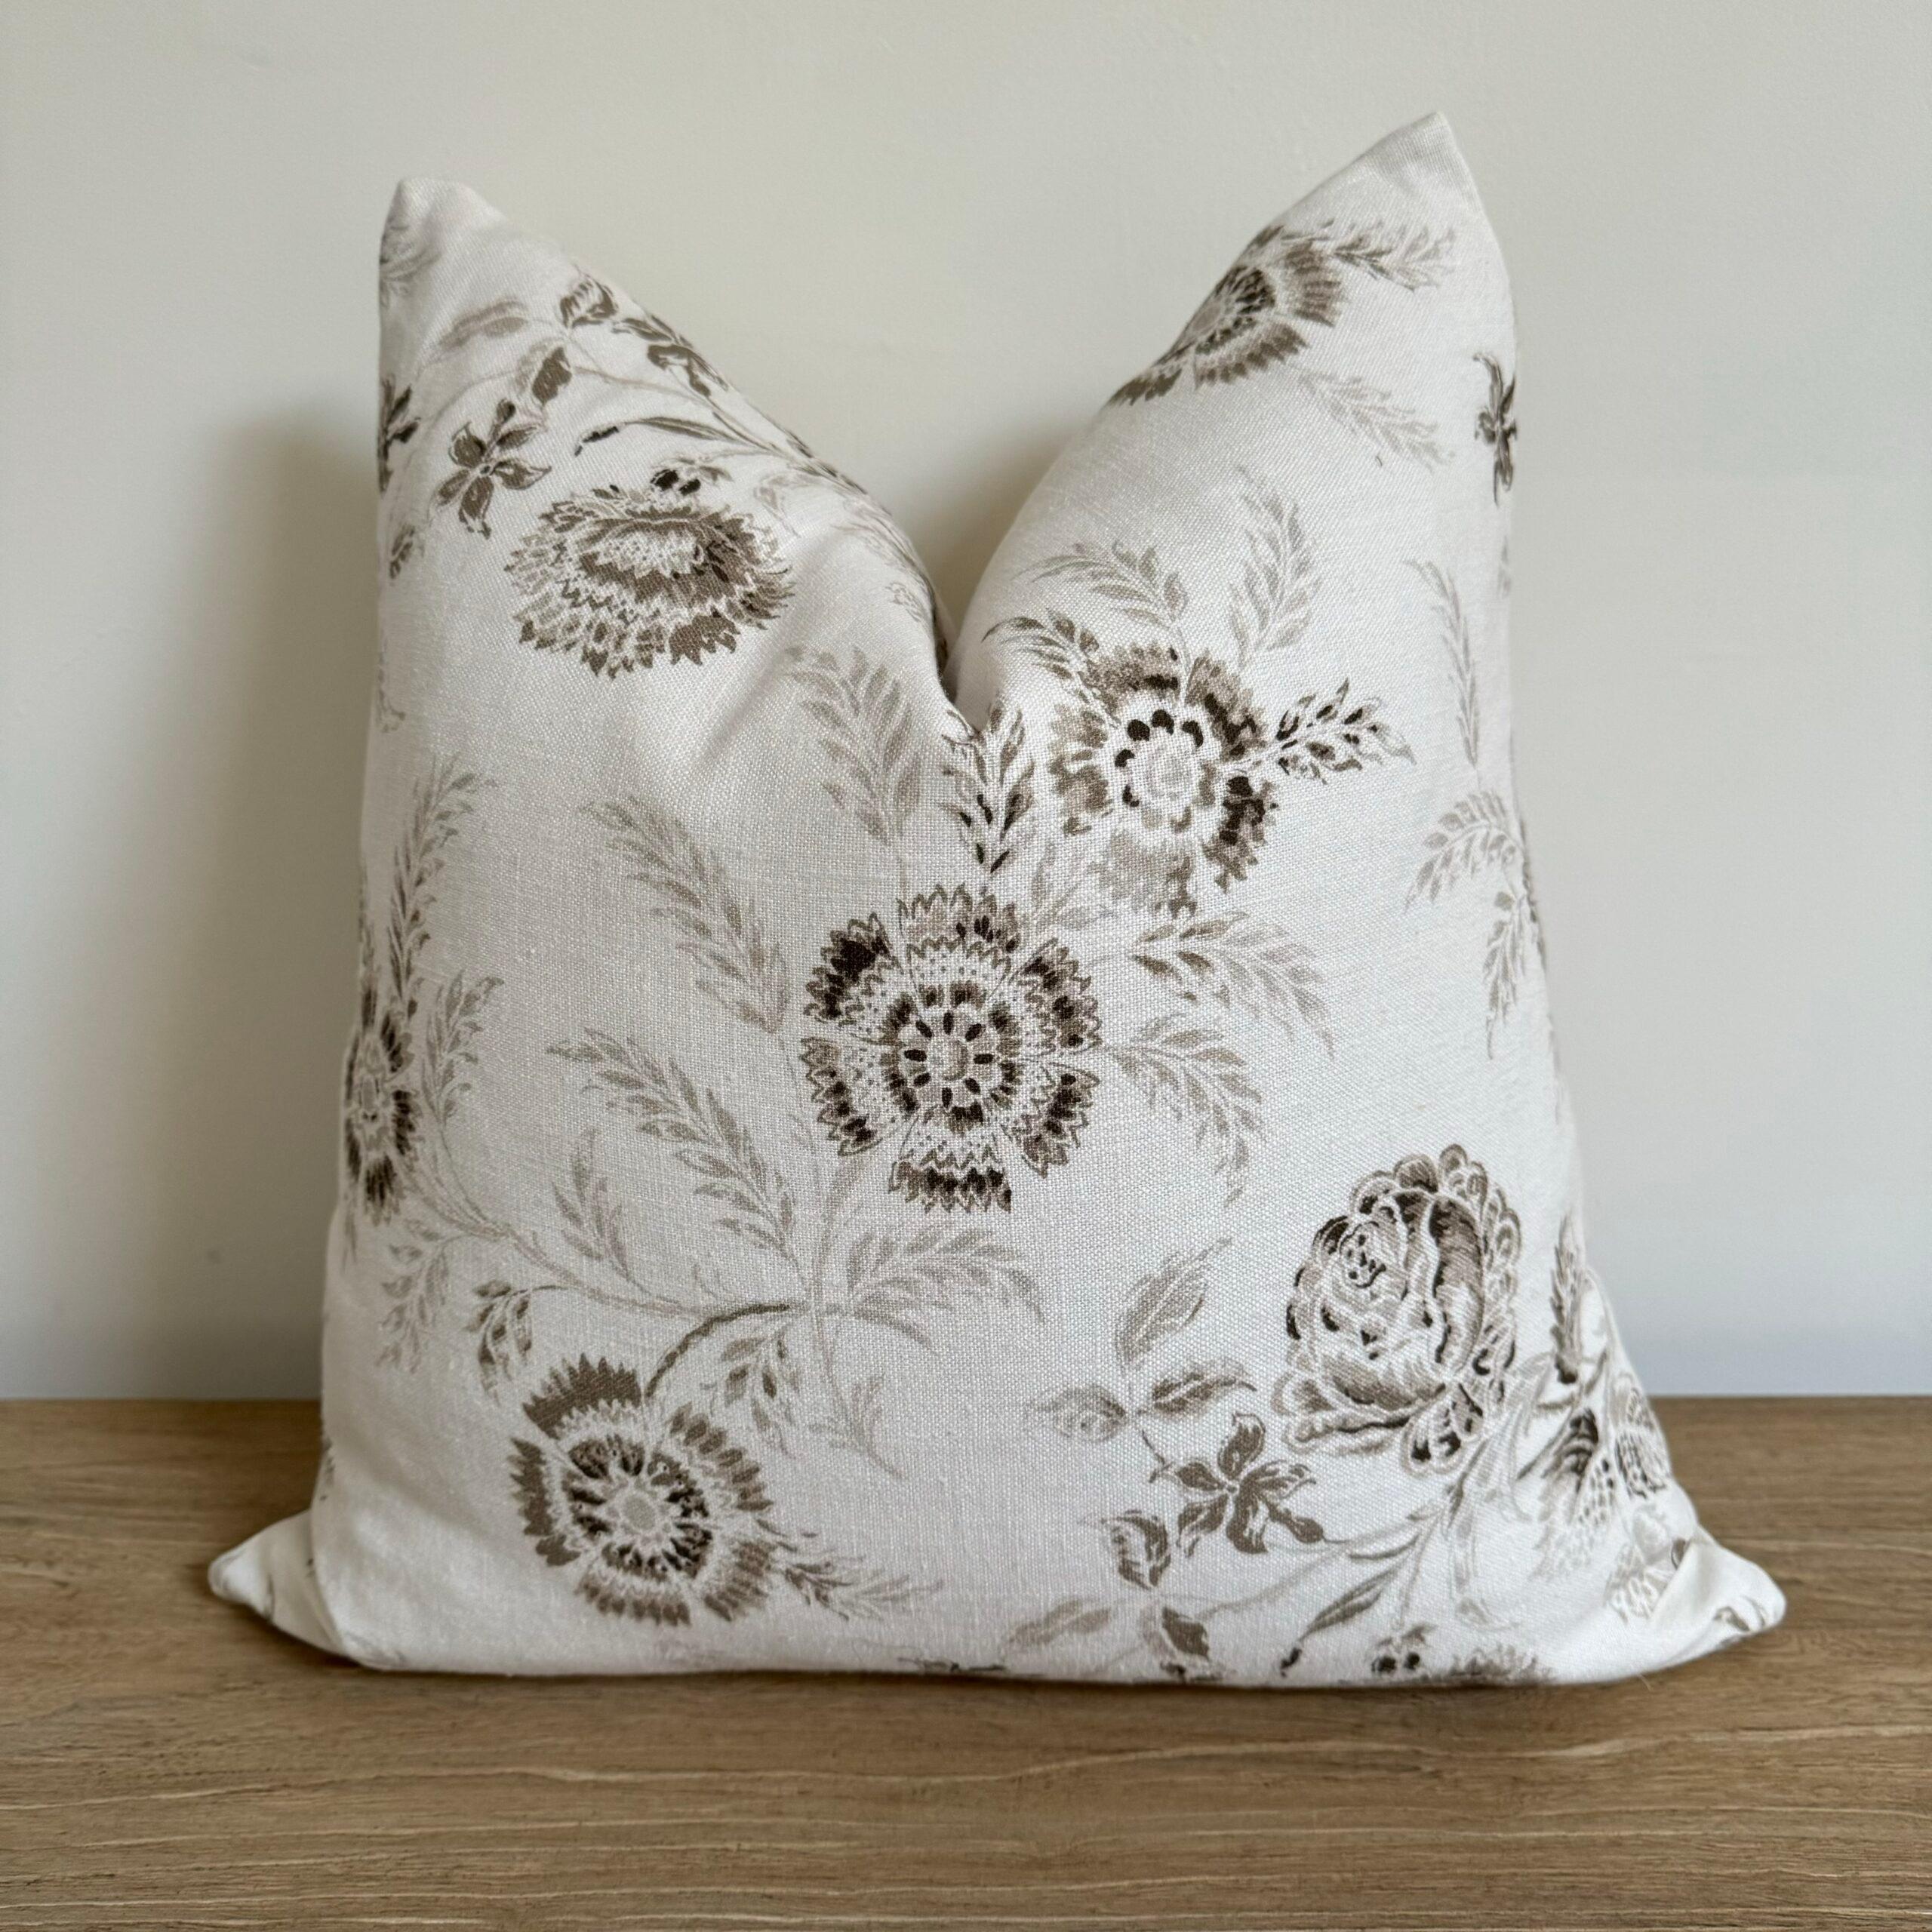 Audree Floral Linen Pillow
Custom made to order this beautiful creamy white linen features a brown tone floral motif face.
Backing in 100% belgian linen.
Antique brass zipper closure
Overlocked seams
Includes down / feather insert.
Care: can be